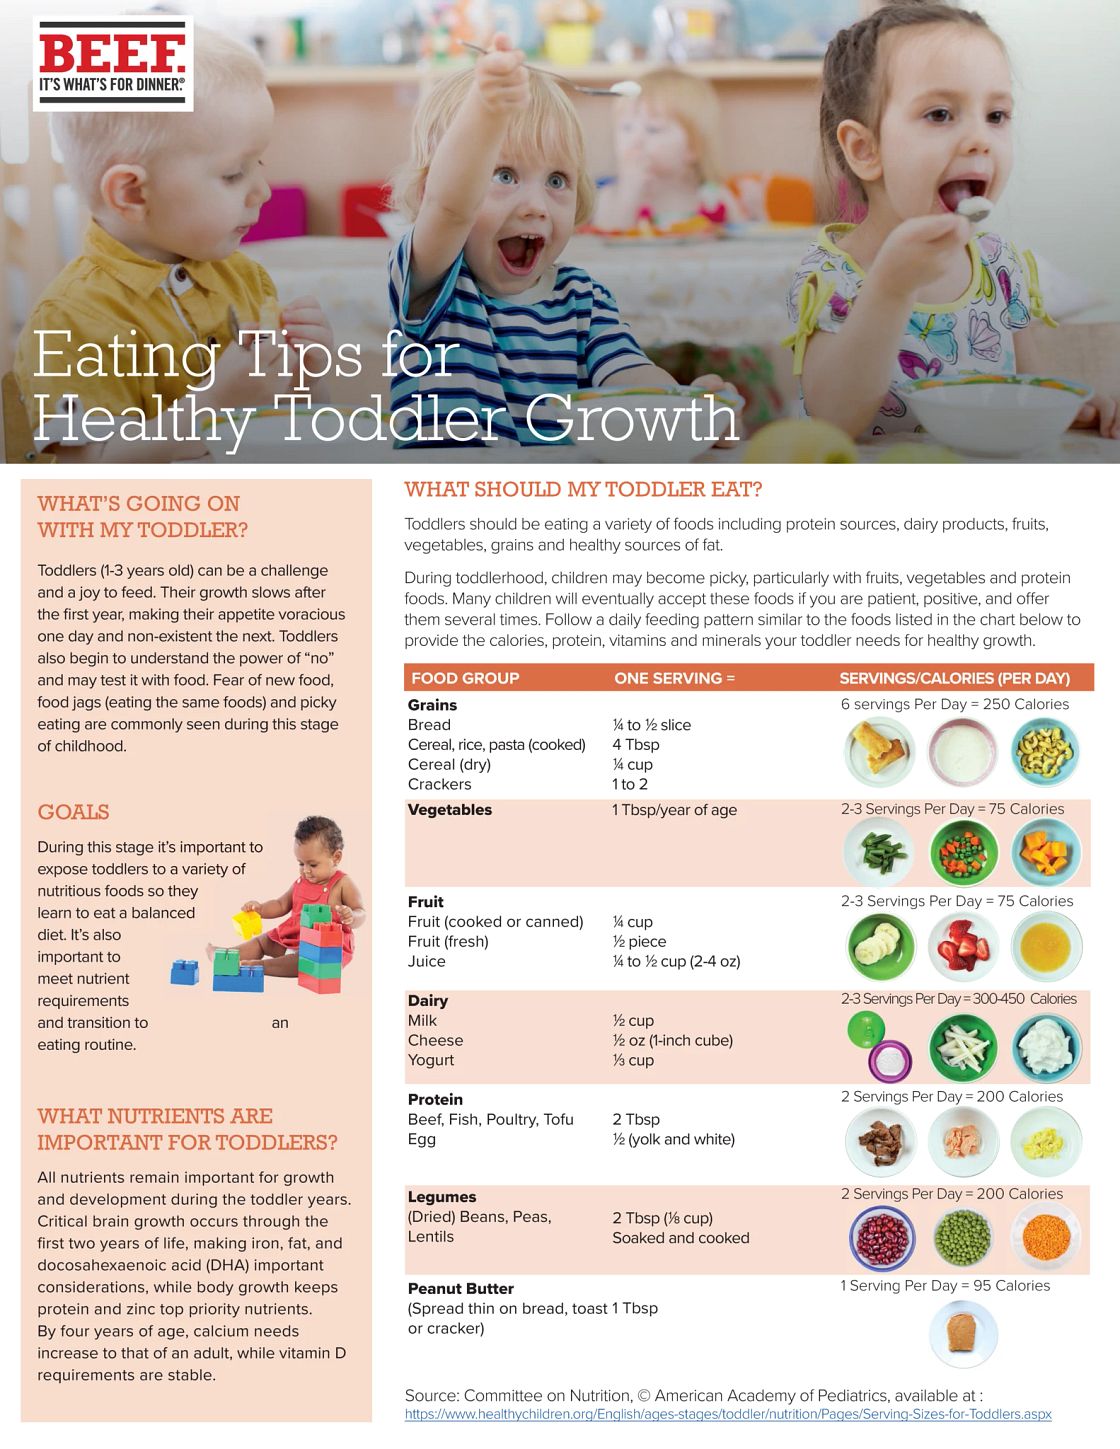 https://embed.widencdn.net/img/beef/digozvwaip/1120px/eating%20tips%20for%20healthy%20toddler%20growth?keep=c&u=nvwl20